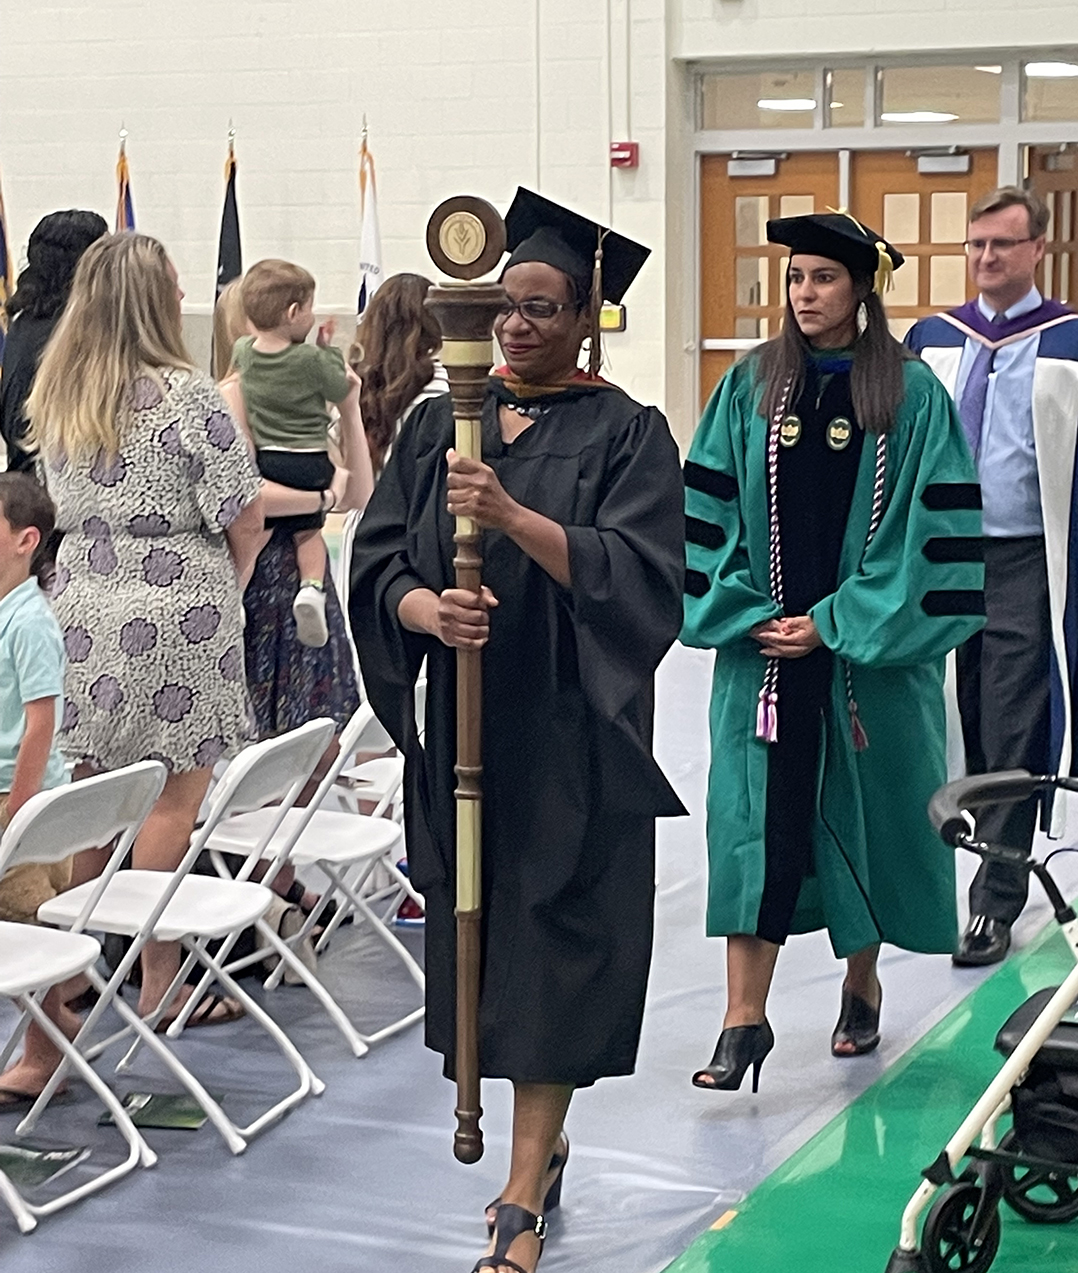 Ivy Tech Hamilton County celebrates first commencement • Current Publishing